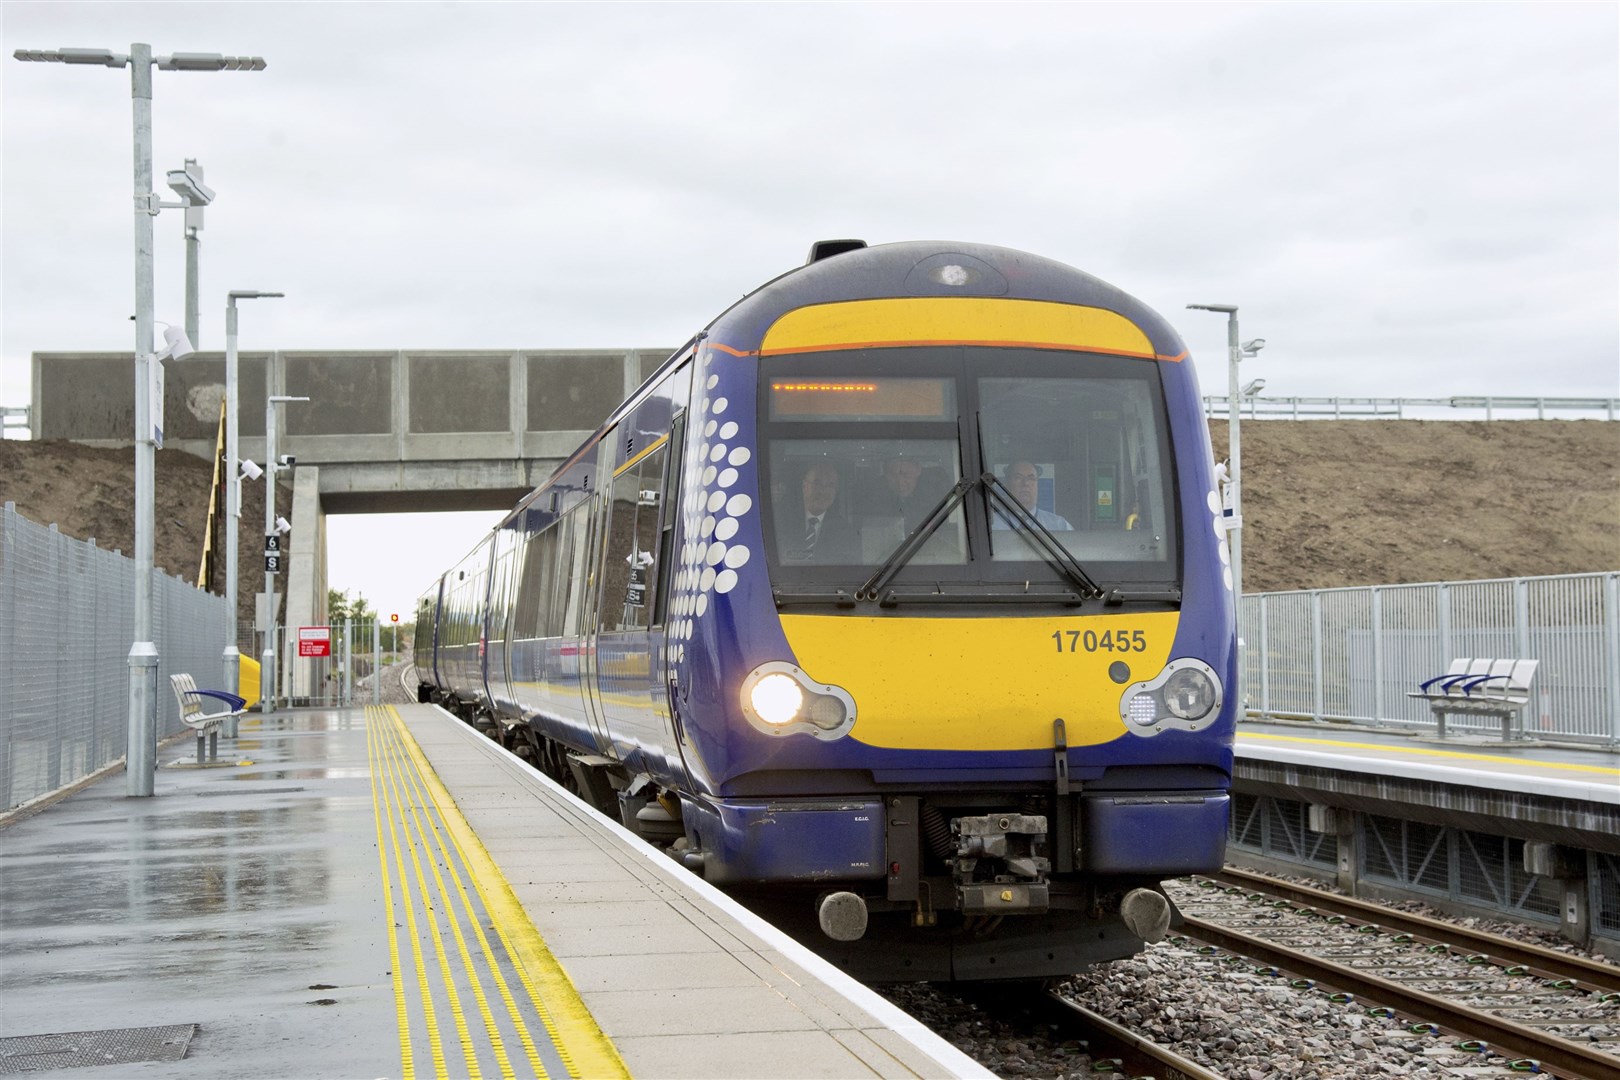 A Scotrail train at Forres Railway Station. Picture: Daniel Forsyth.